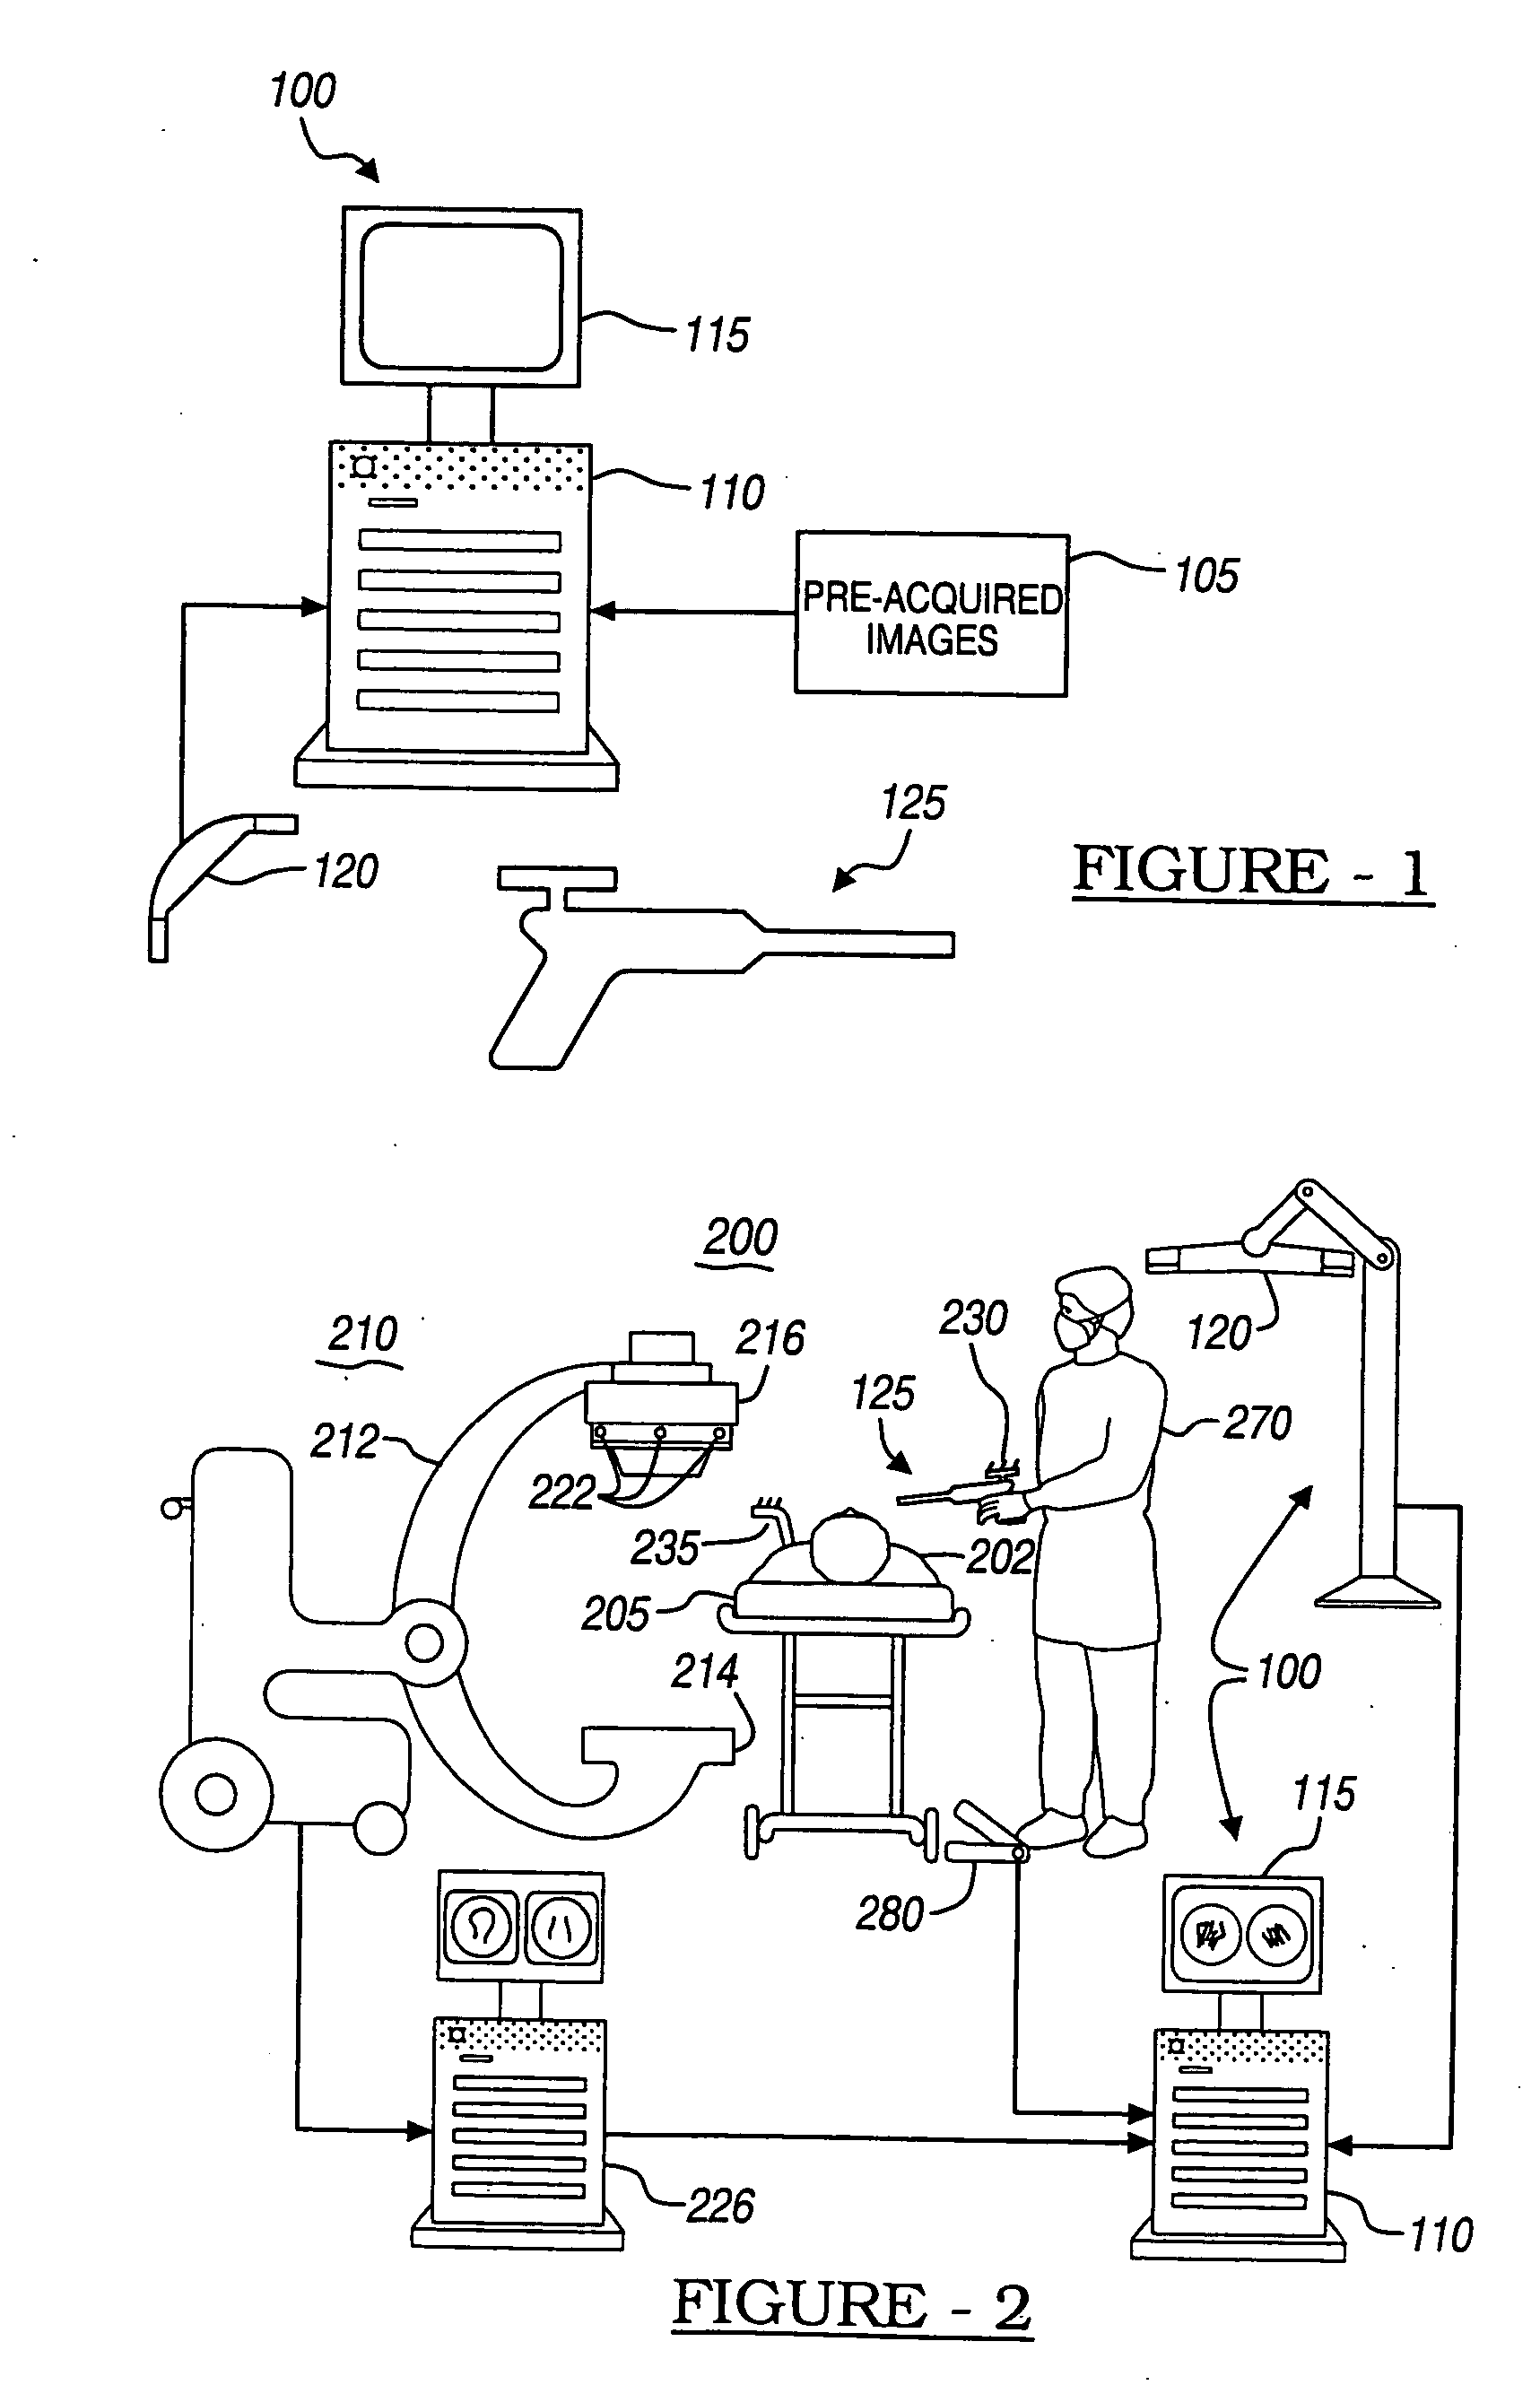 Trajectory storage apparatus and method for surgical navigation systems